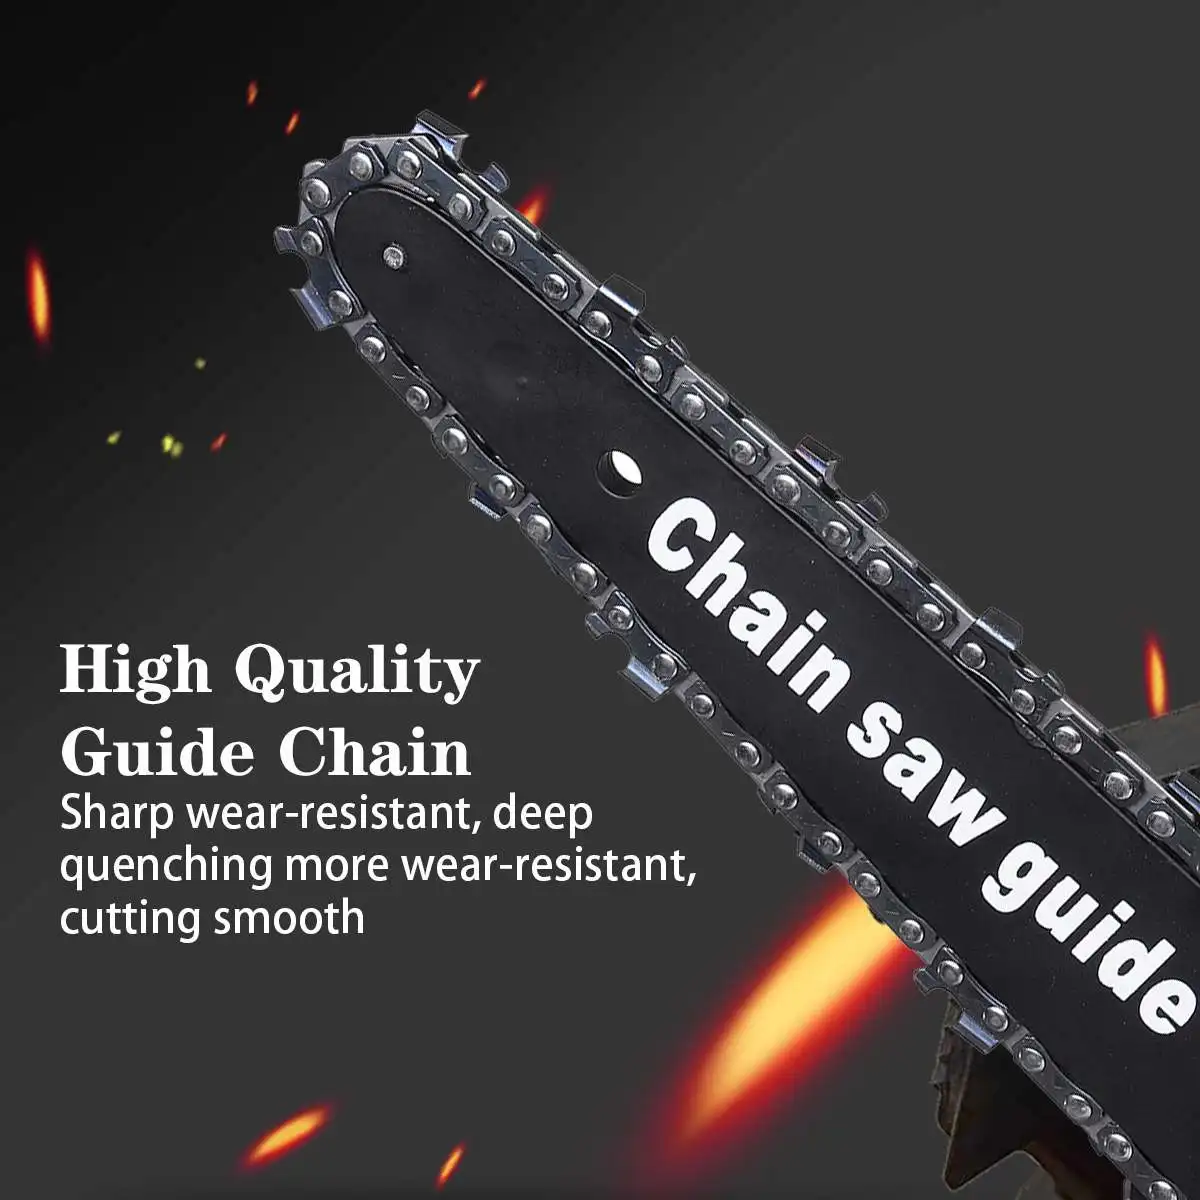 

CN 1500W Electric Chain Saw Power Pruning ChainSaw Cordless Garden Tree Logging Woodworking Cutter Tool for Makita Battery